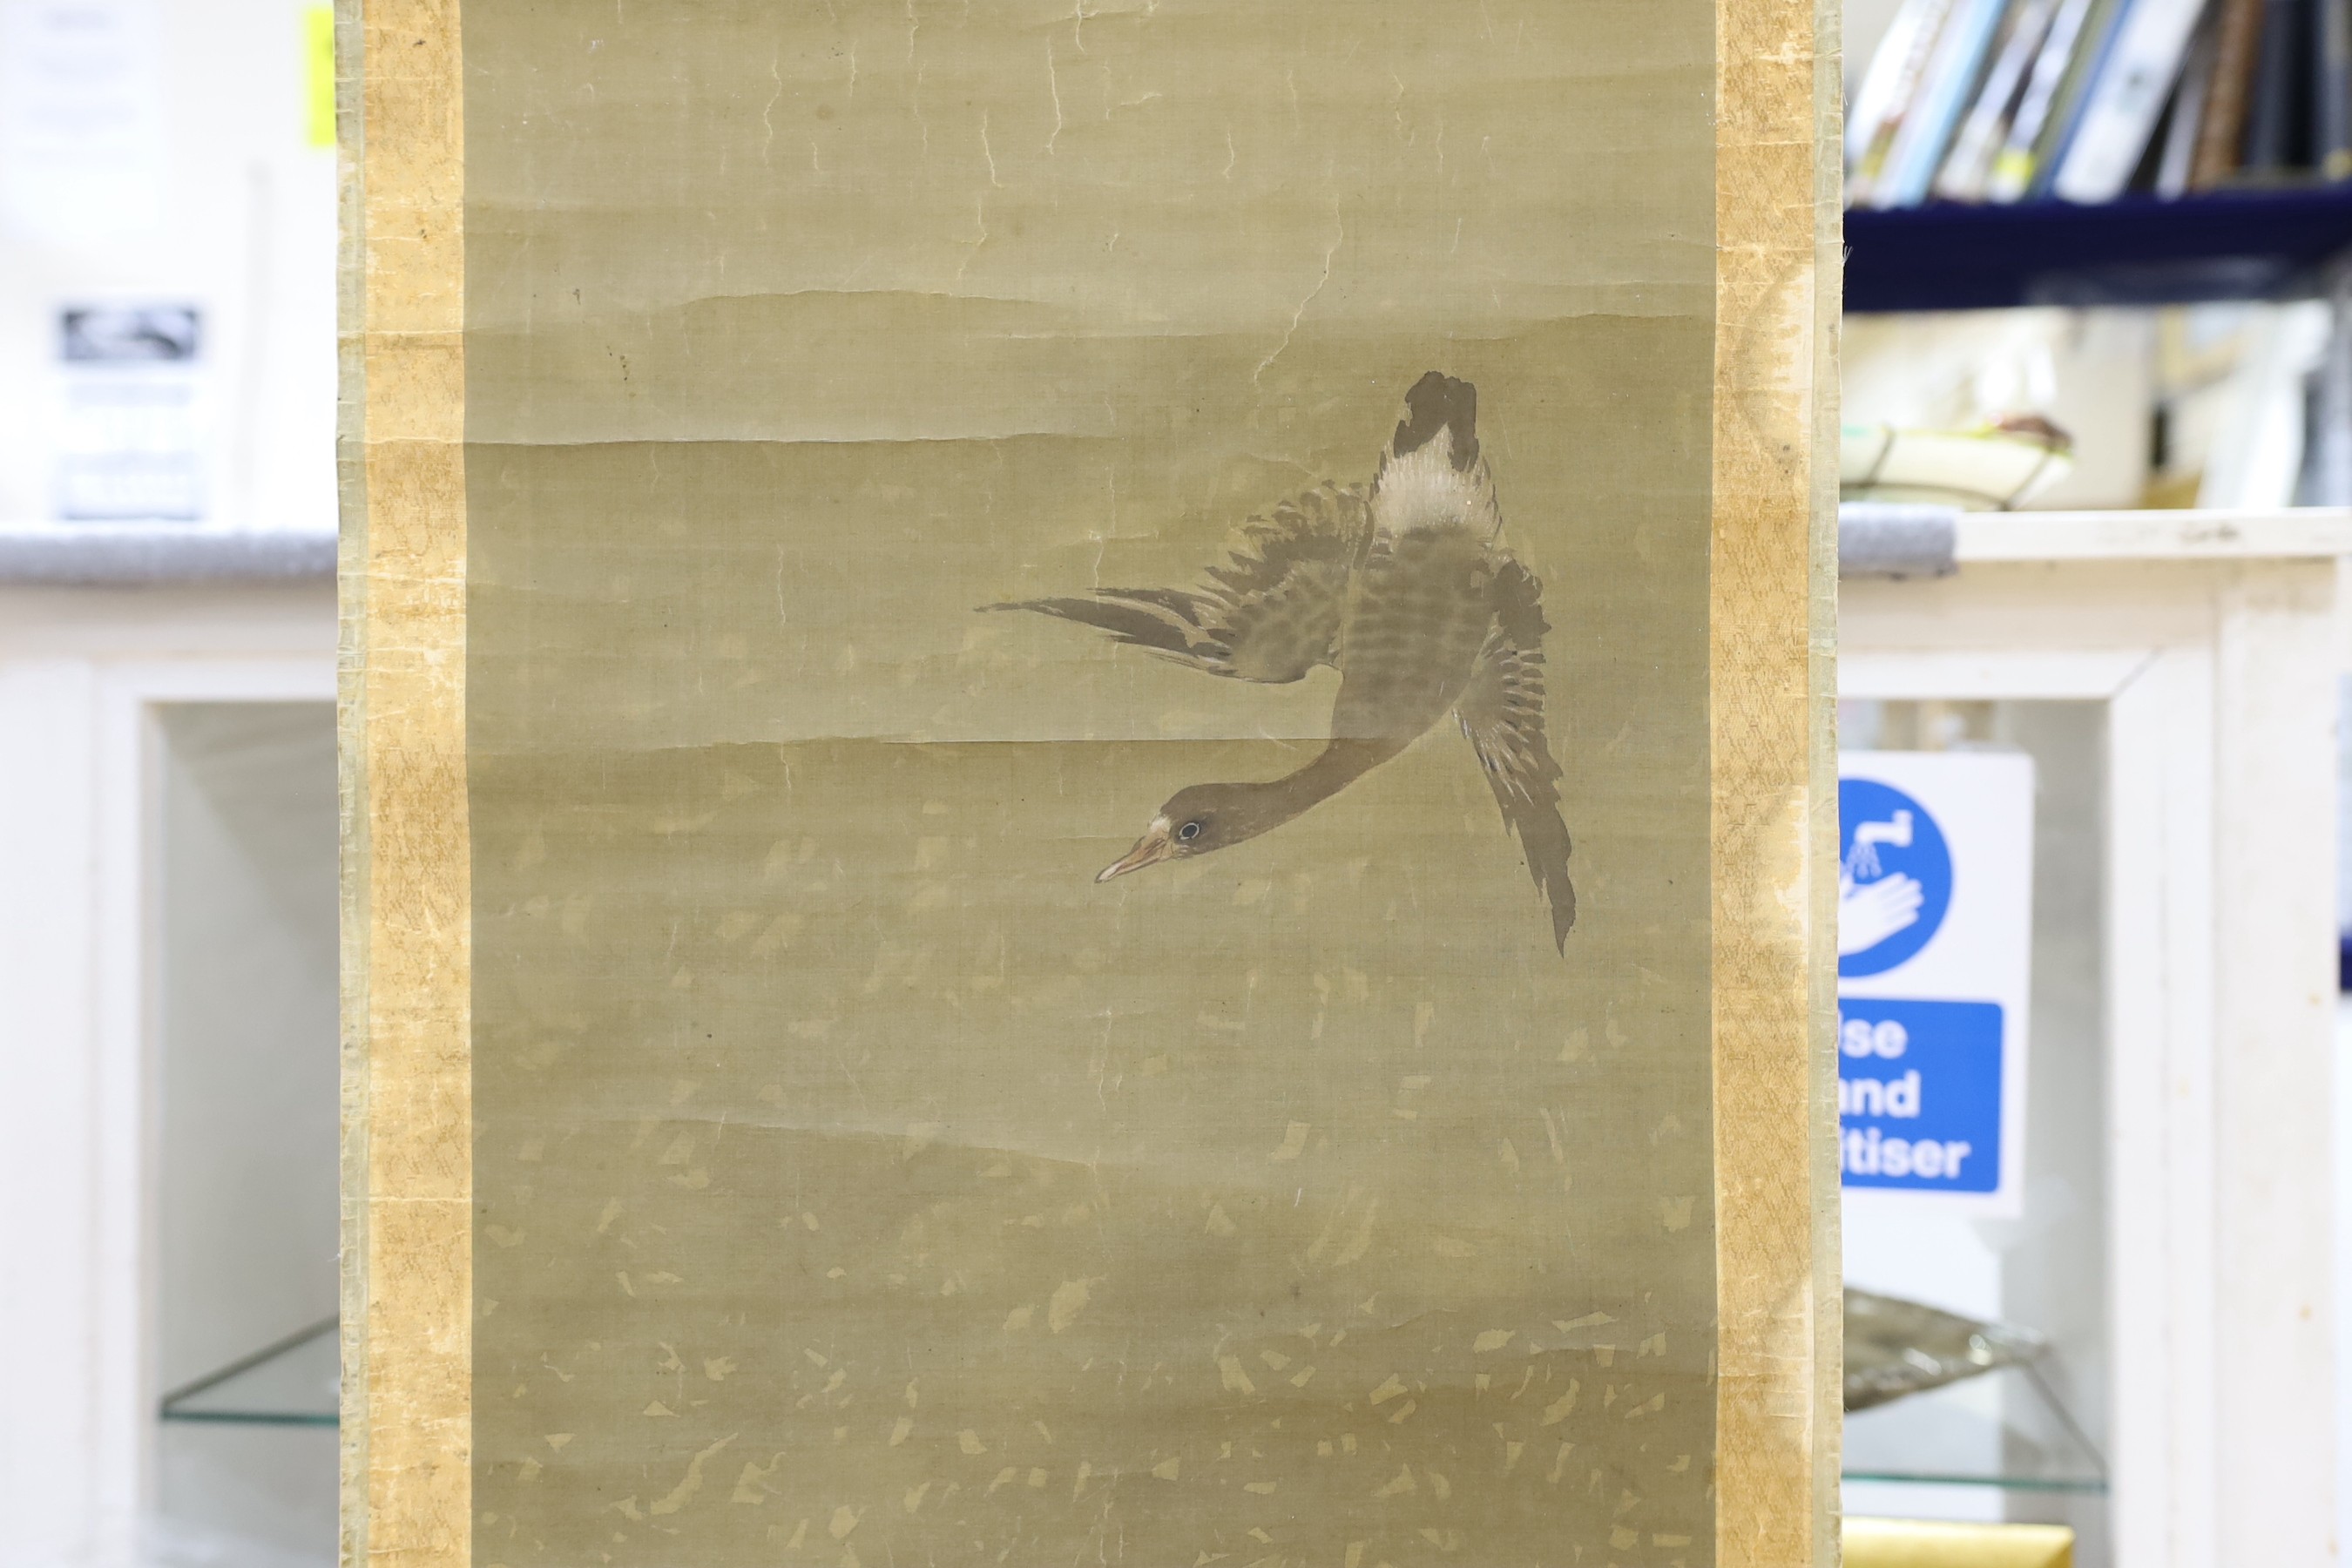 A 19th century Japanese scroll painting on silk of geese, signed, image 102 cm X 36 cm